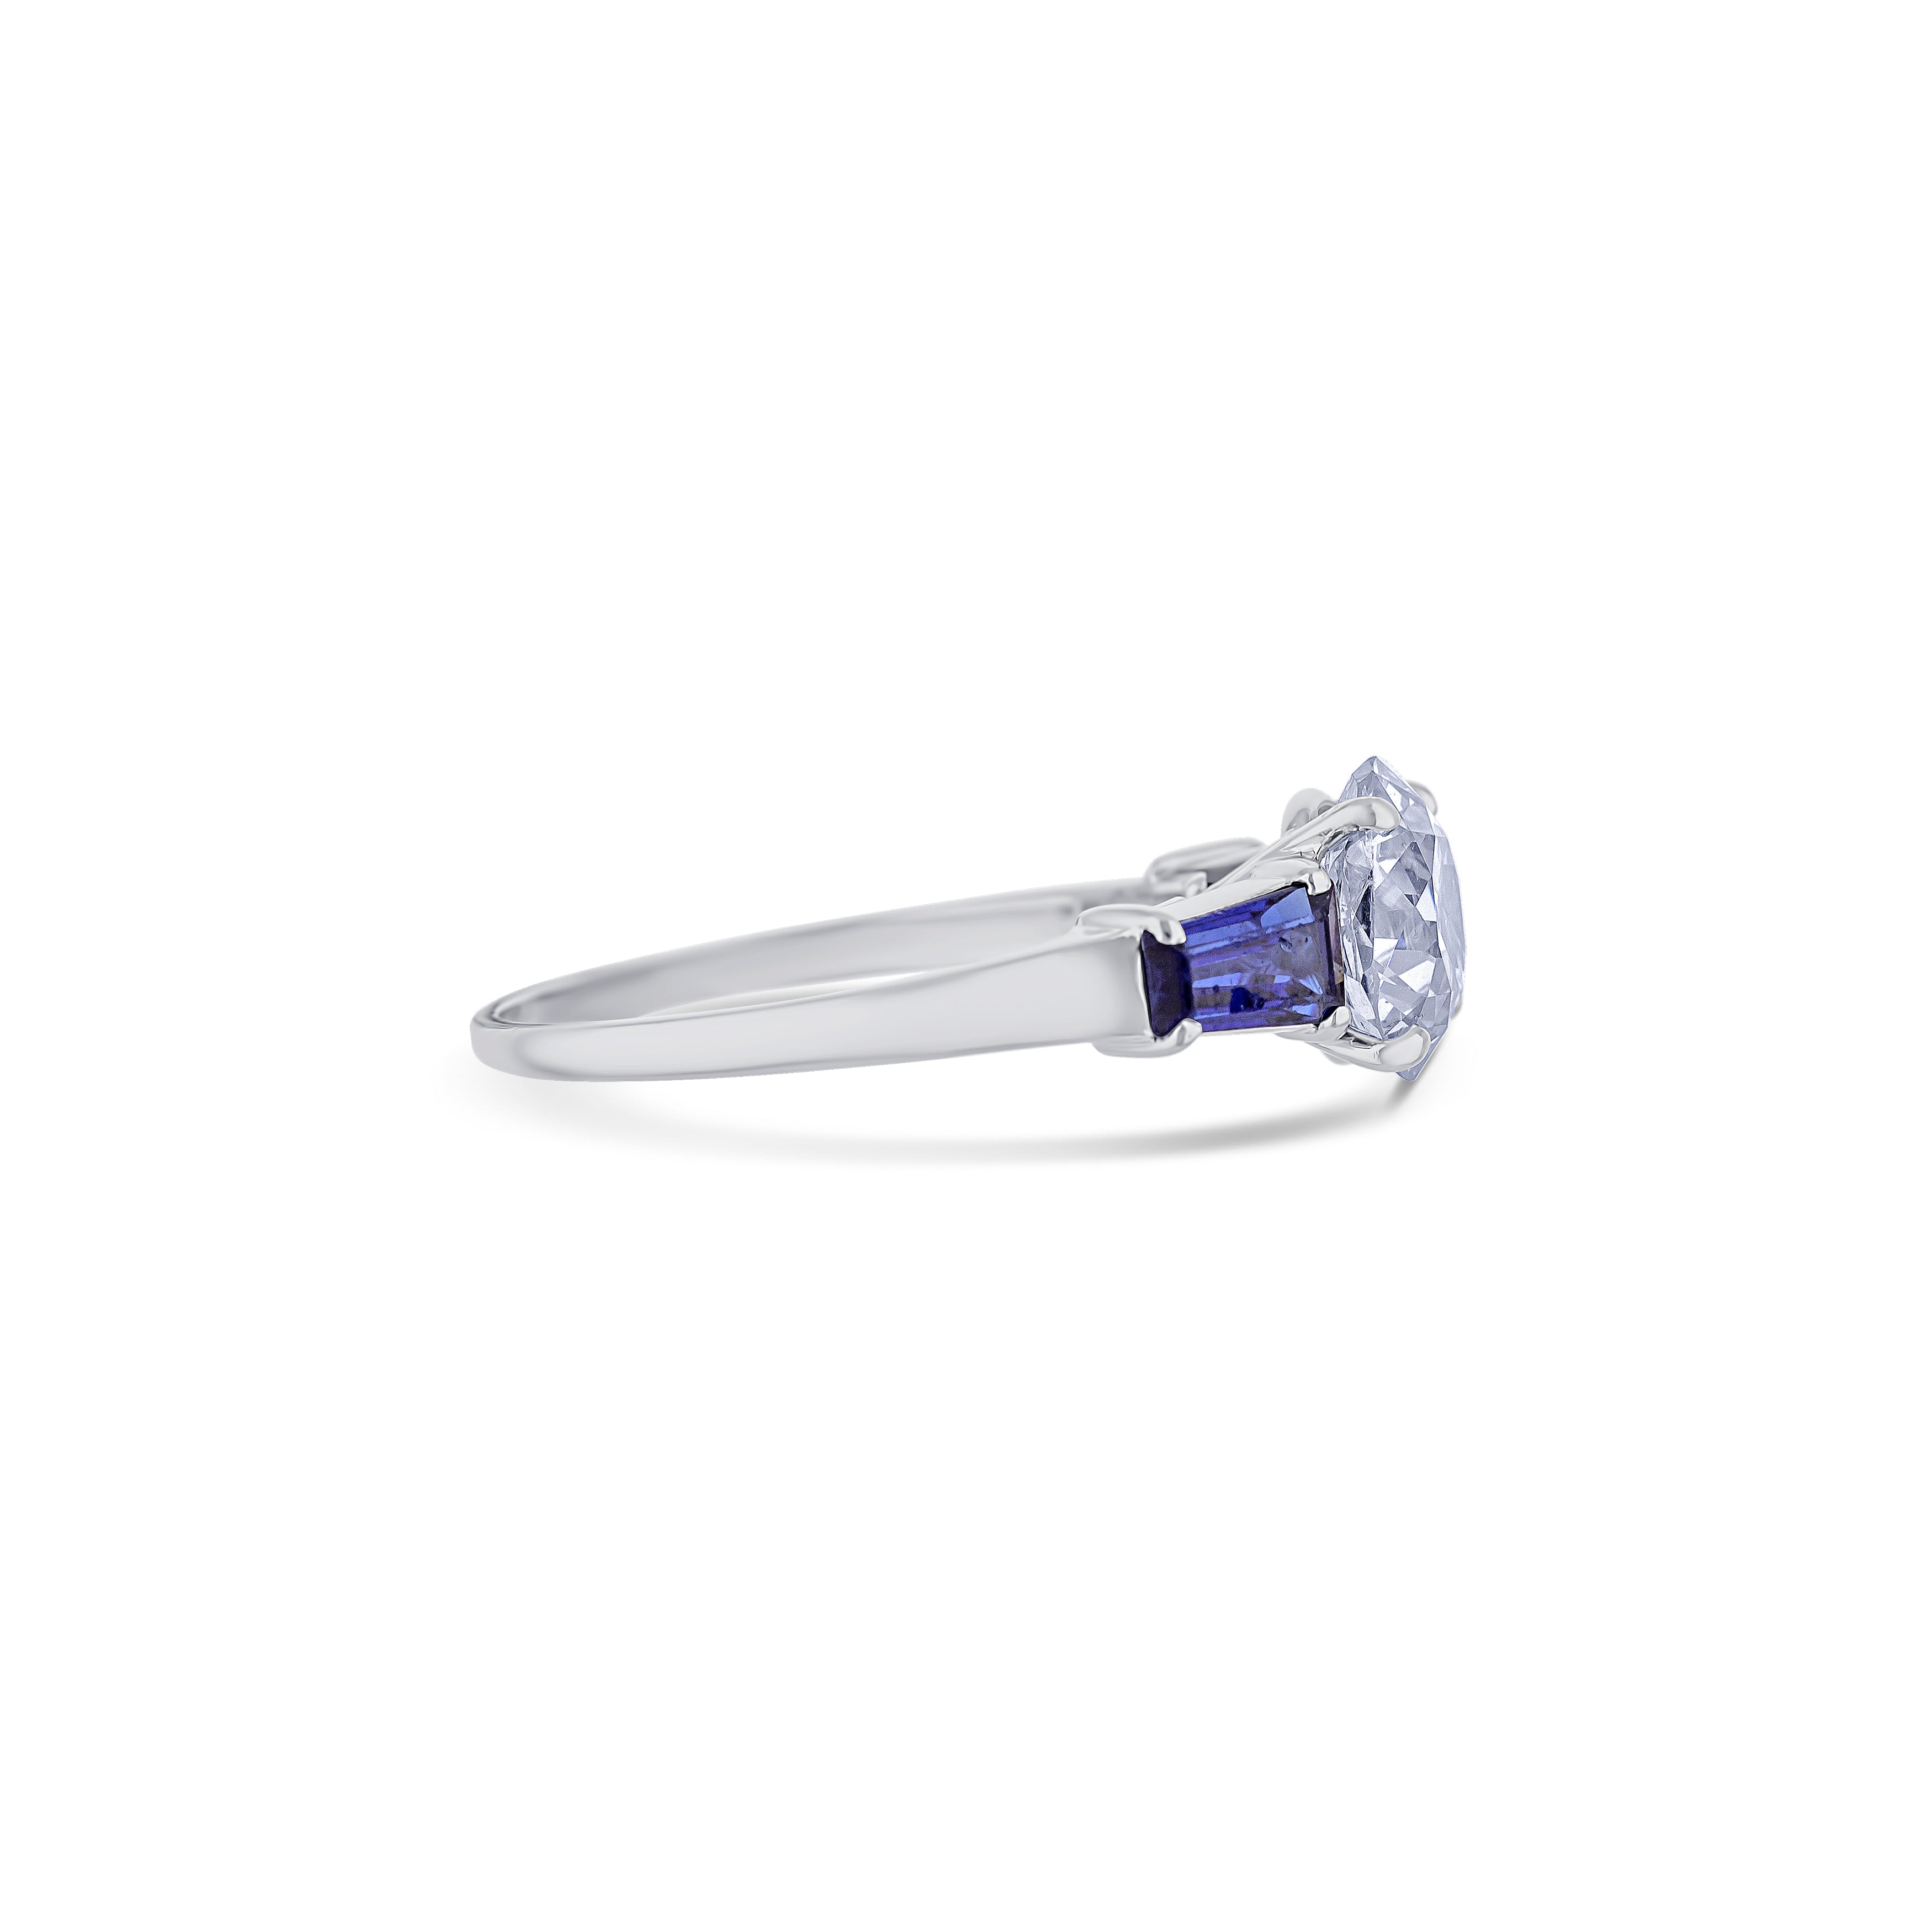 Old Mine Cut Diamond Ring with Sapphires